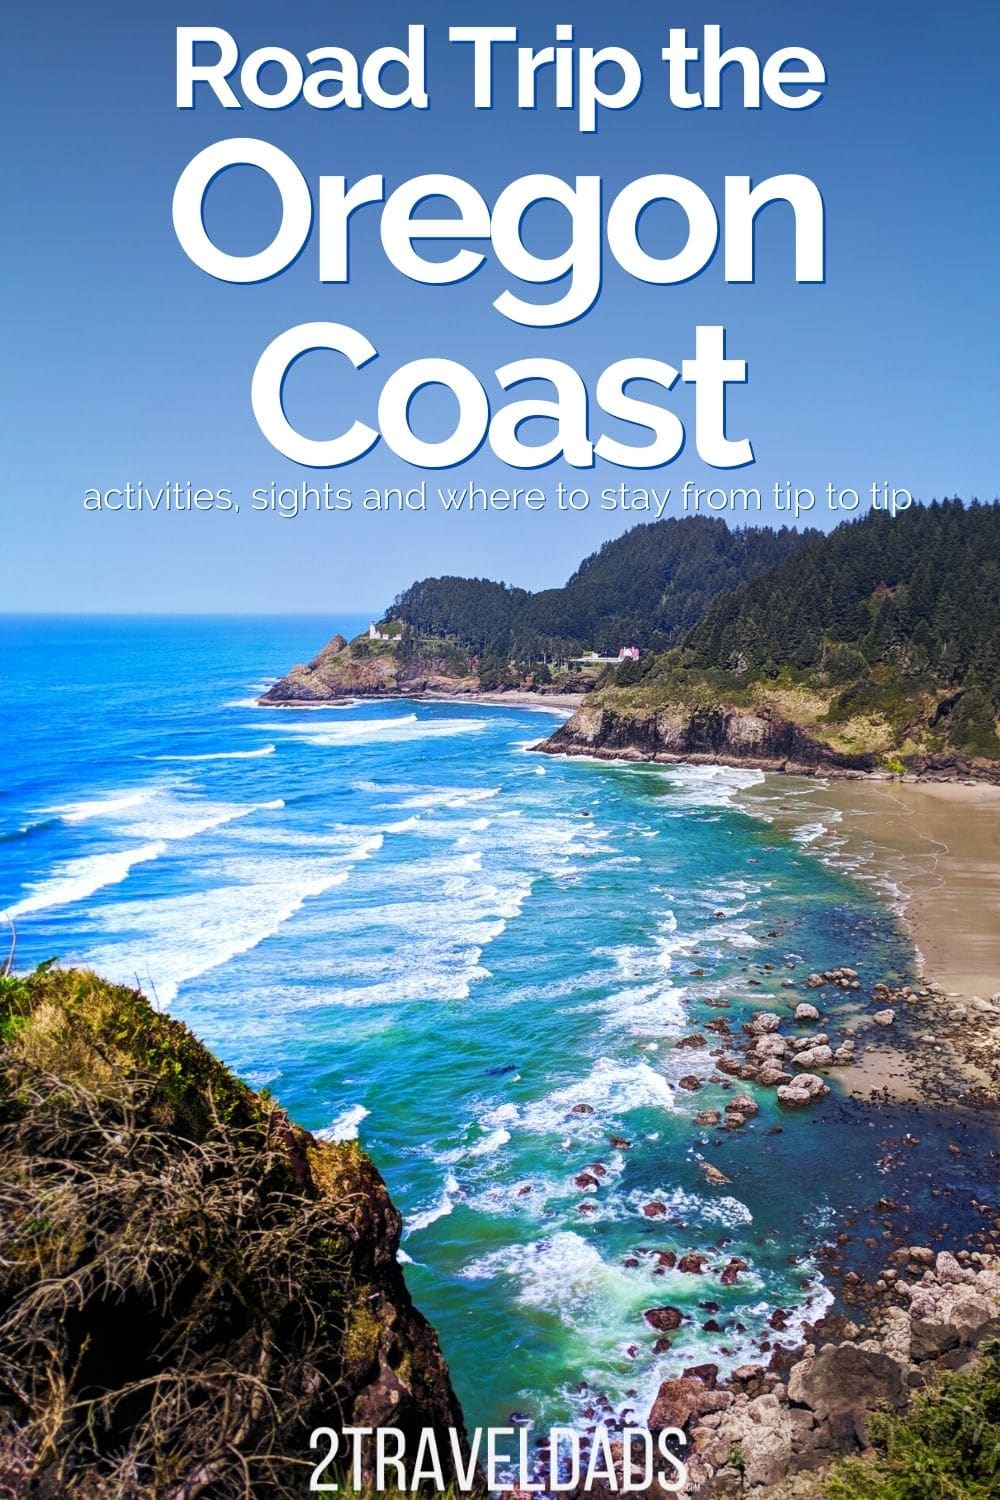 Complete Oregon Coast road trip itinerary from north to south. Best things to do, sights to see and where to stay along the rugged Oregon Coast.